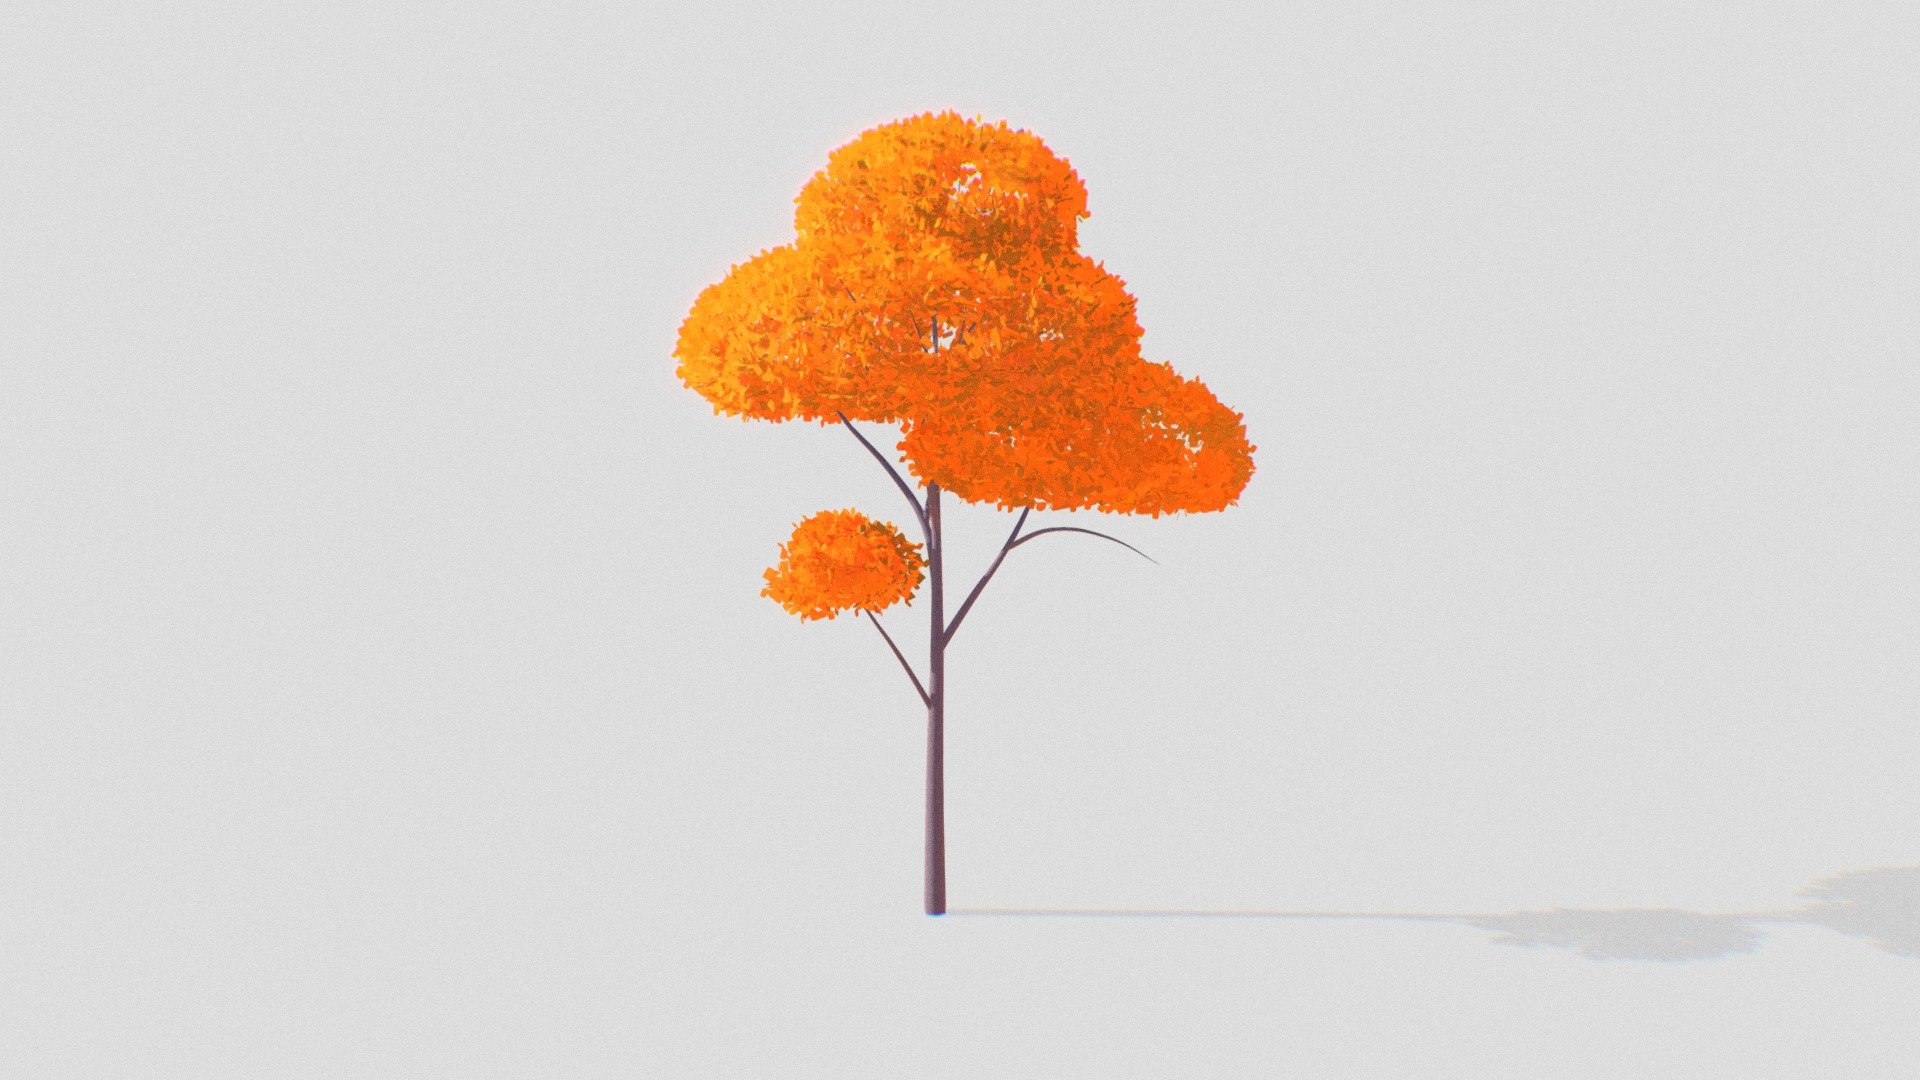 I made this for a youtube tutorial. Feel free to download and use it in your project!

Thank you,
Aki - Stylized Tree - Download Free 3D model by Aki (@Akishaqs) 3d model